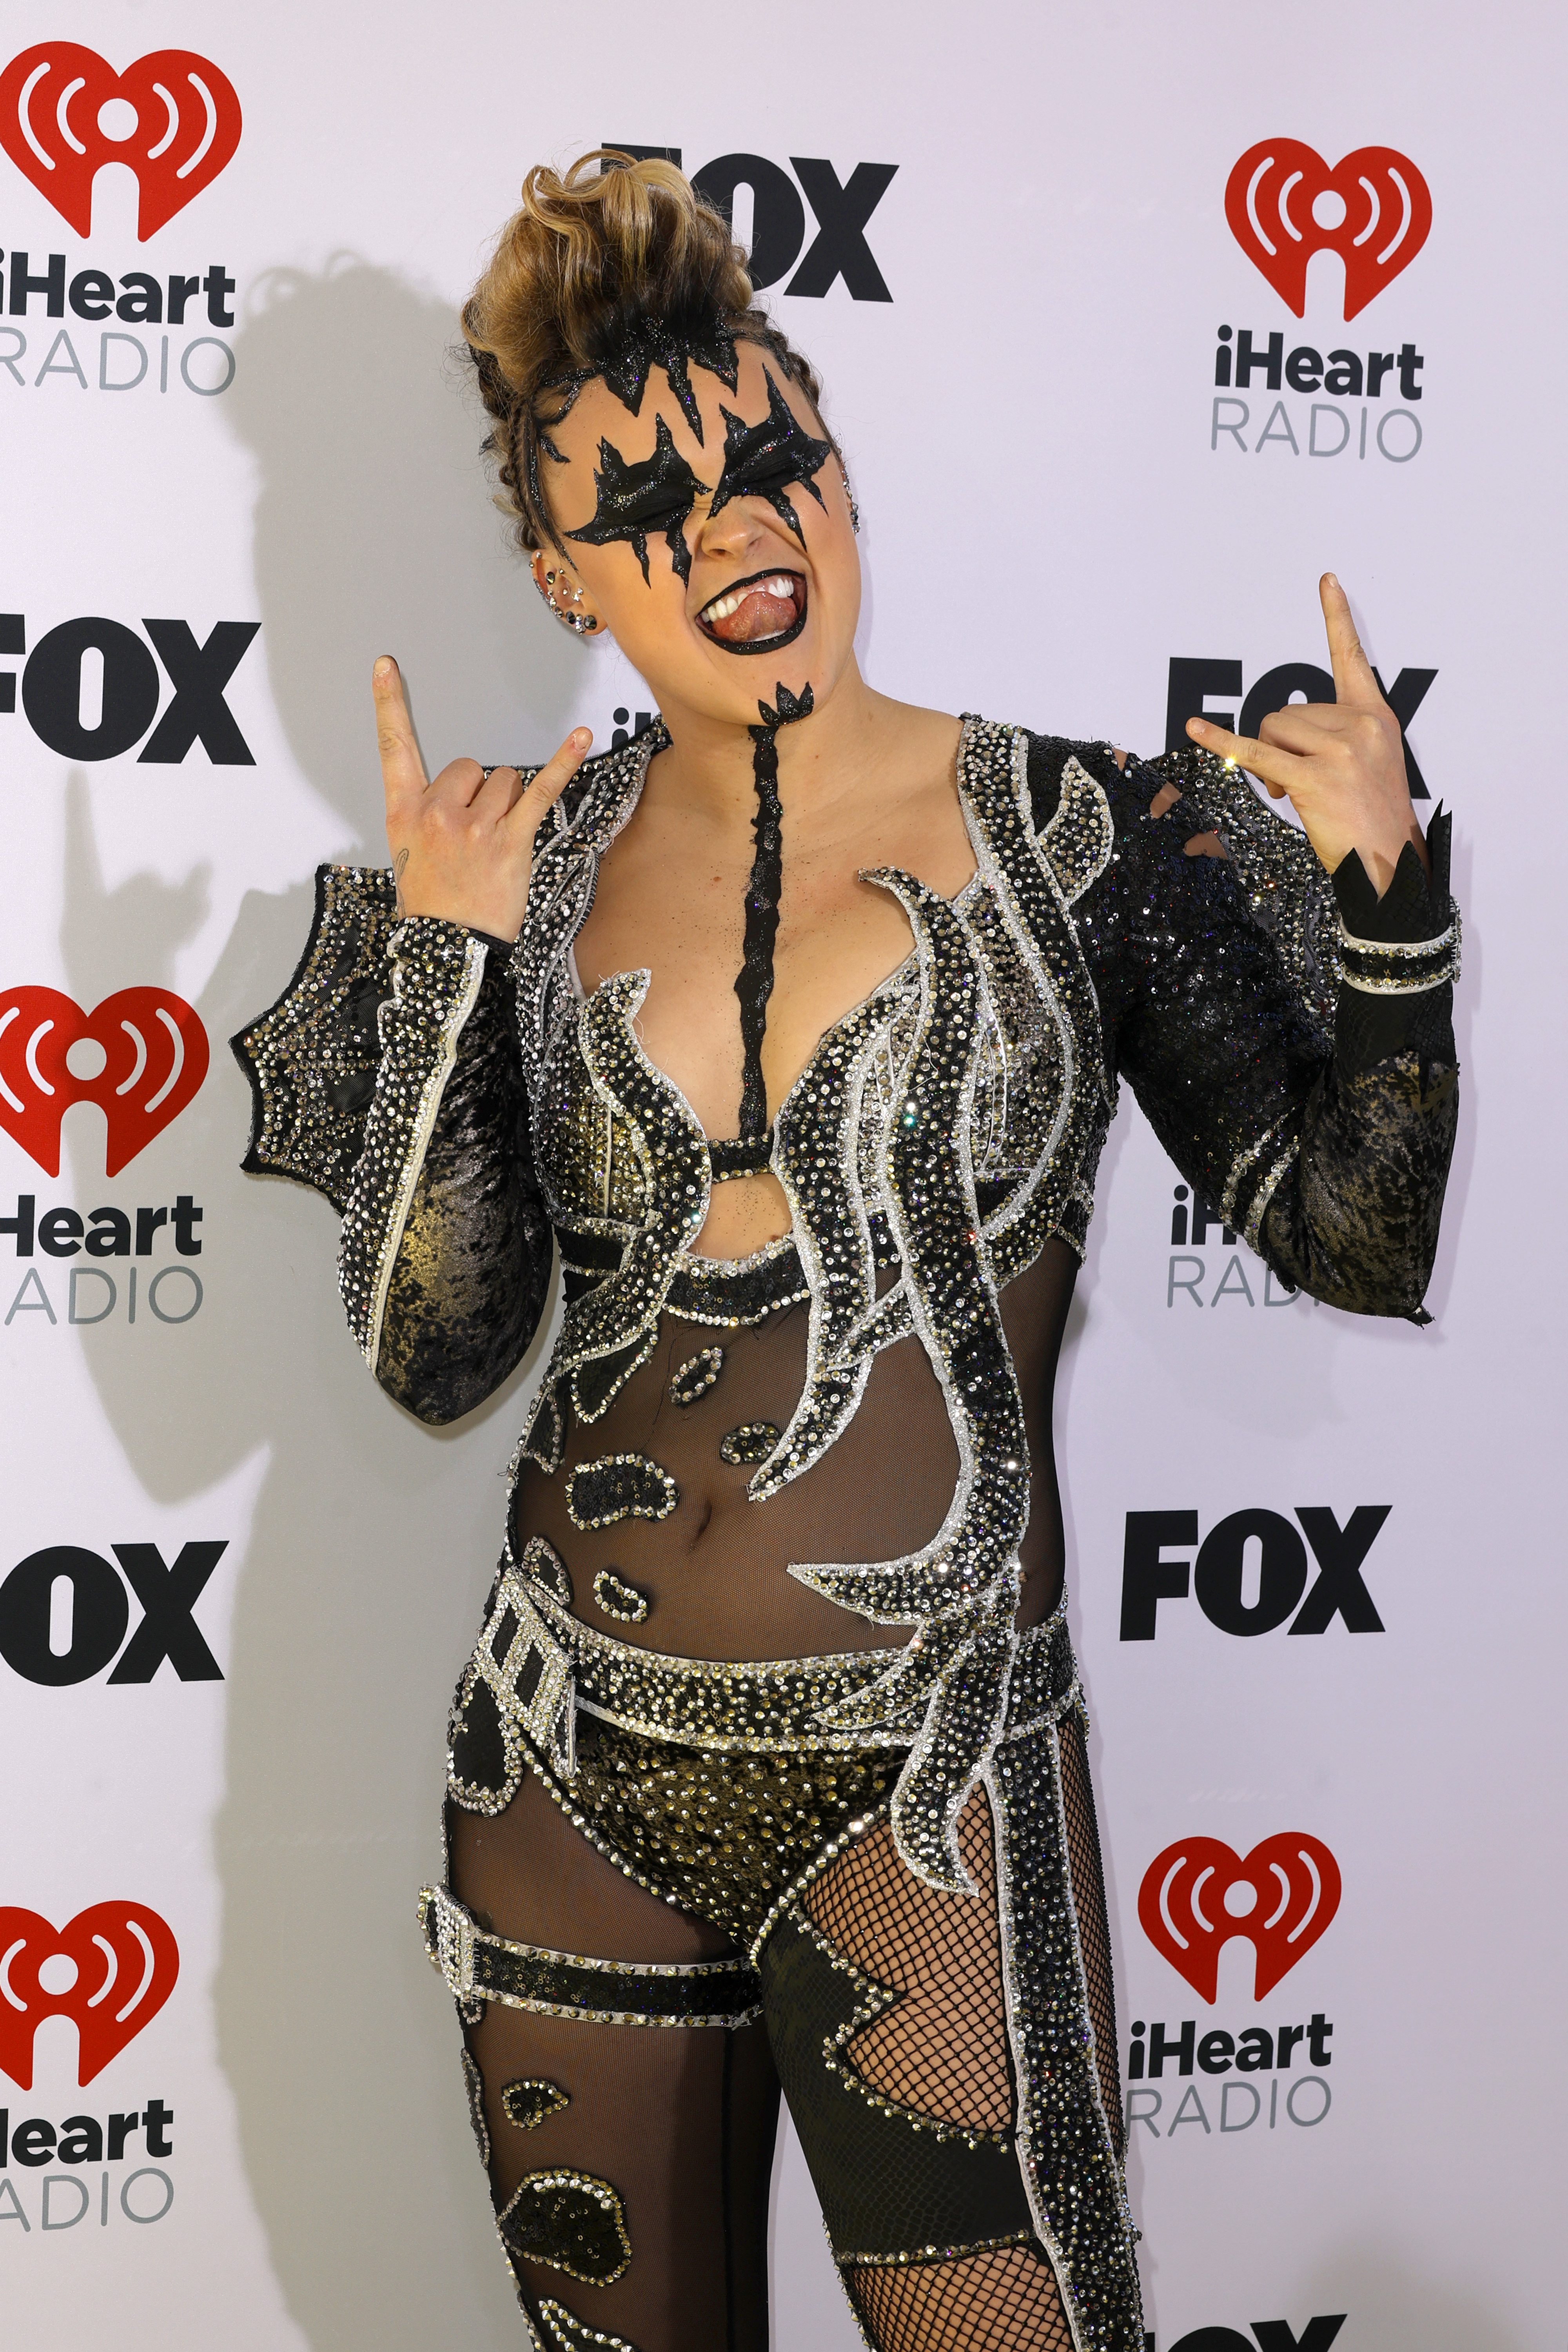 JoJo Siwa in a black embellished jumpsuit with cutouts, making a rock hand gesture